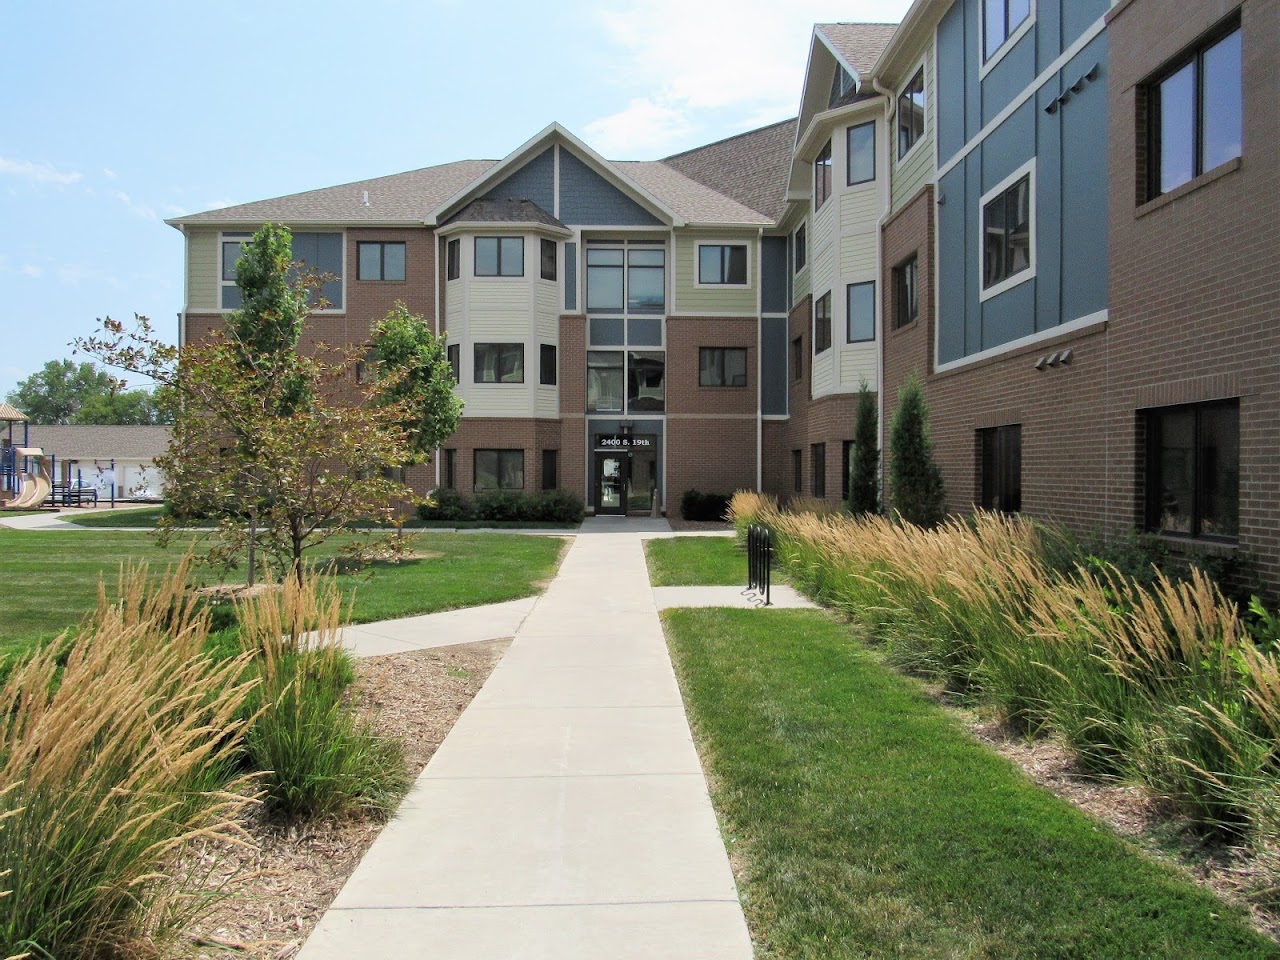 Photo of BEACON PLACE. Affordable housing located at 2400 S 19TH ST COUNCIL BLUFFS, IA 51501